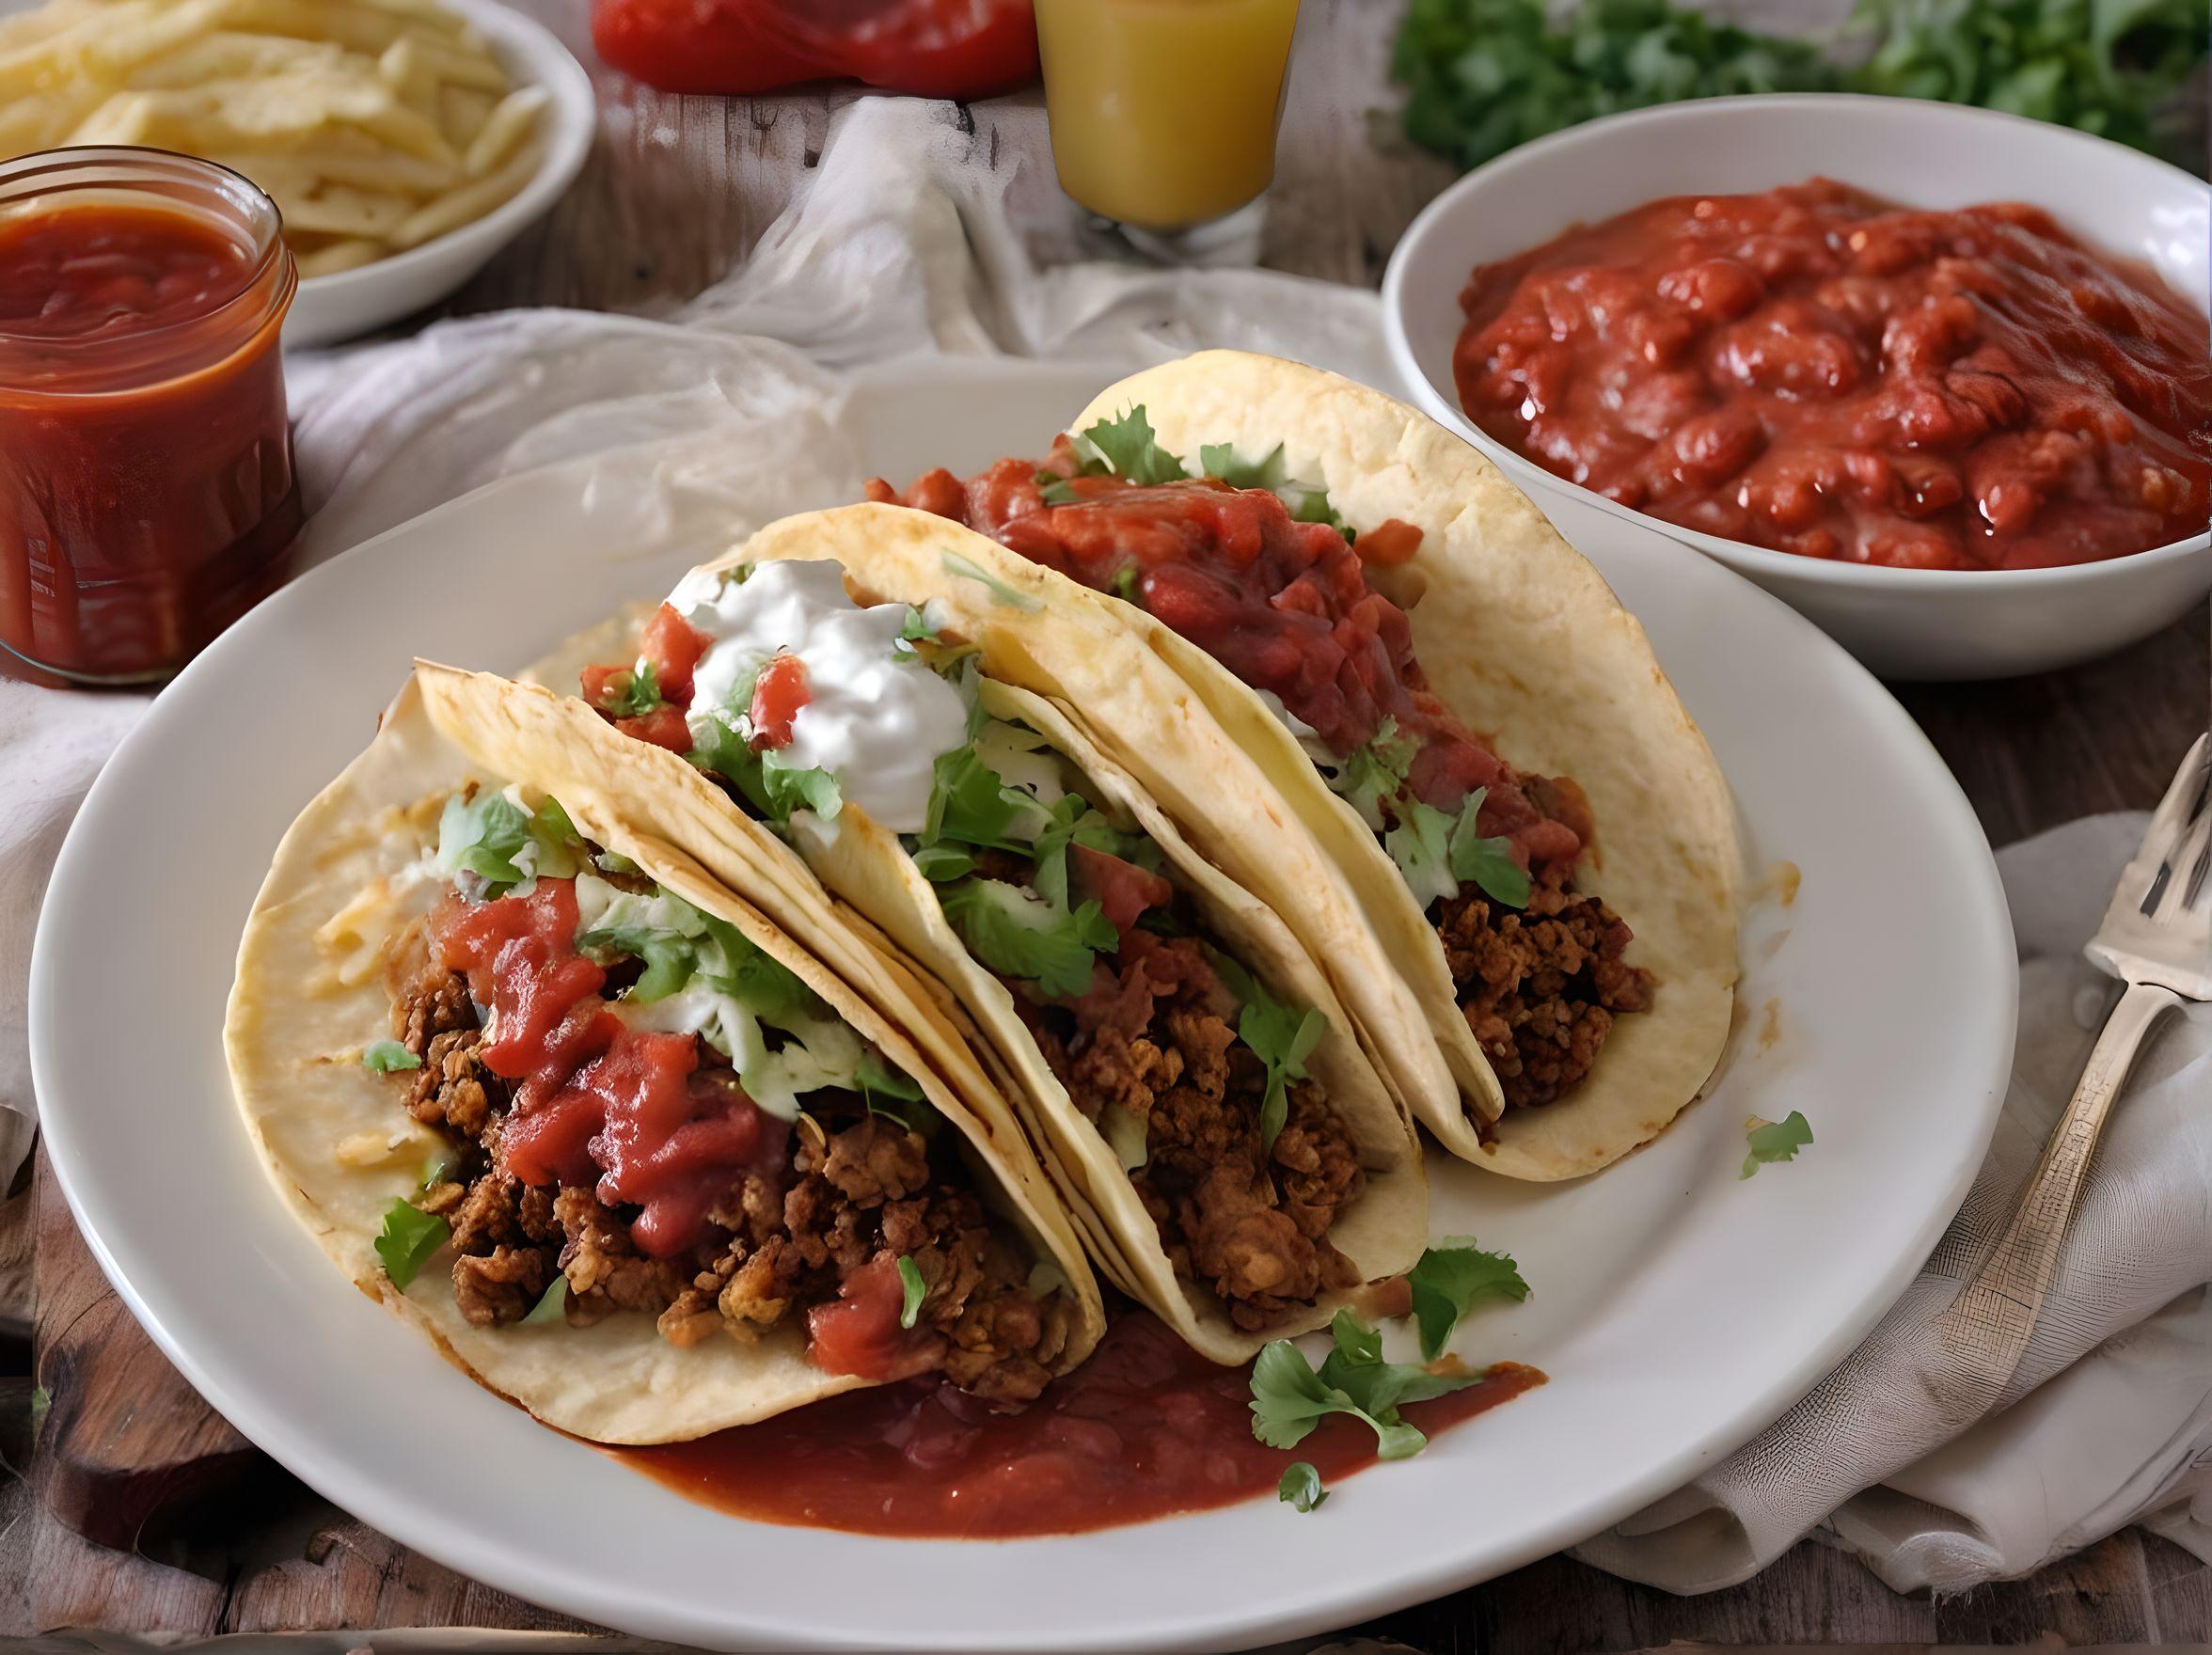 Tacos- a bowl of mashed potatoes- a bag of meat sauce fries- delicate white plate- fork and knife- ketchup- salsa sauce- delicious looking